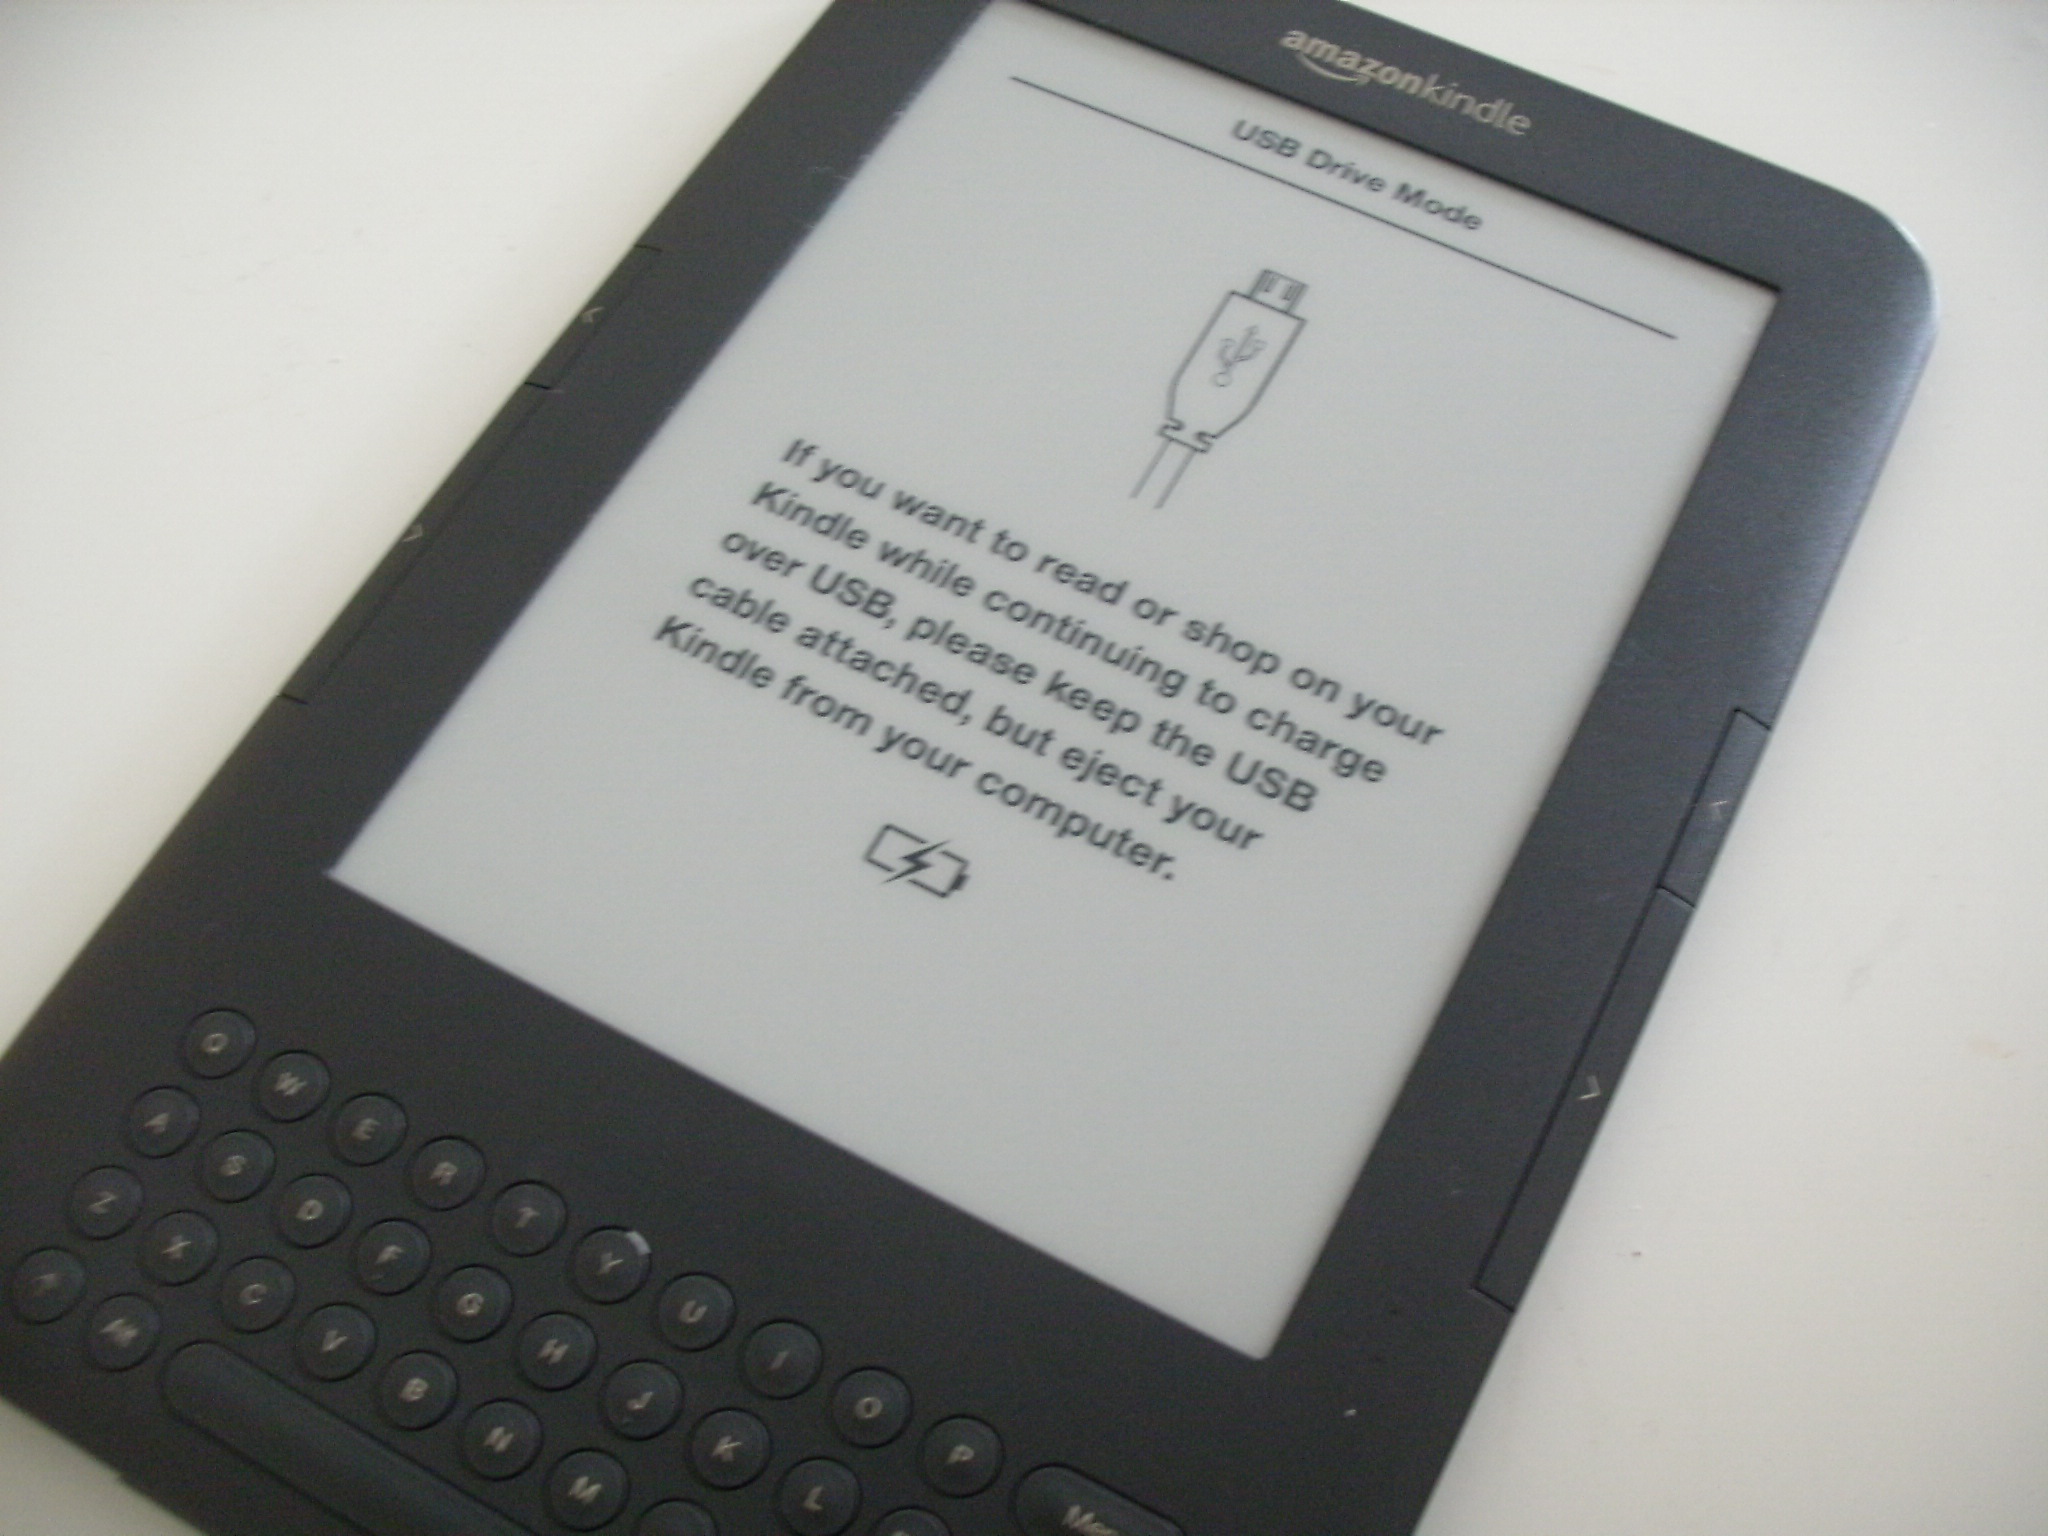 android file transfer utility on kindle